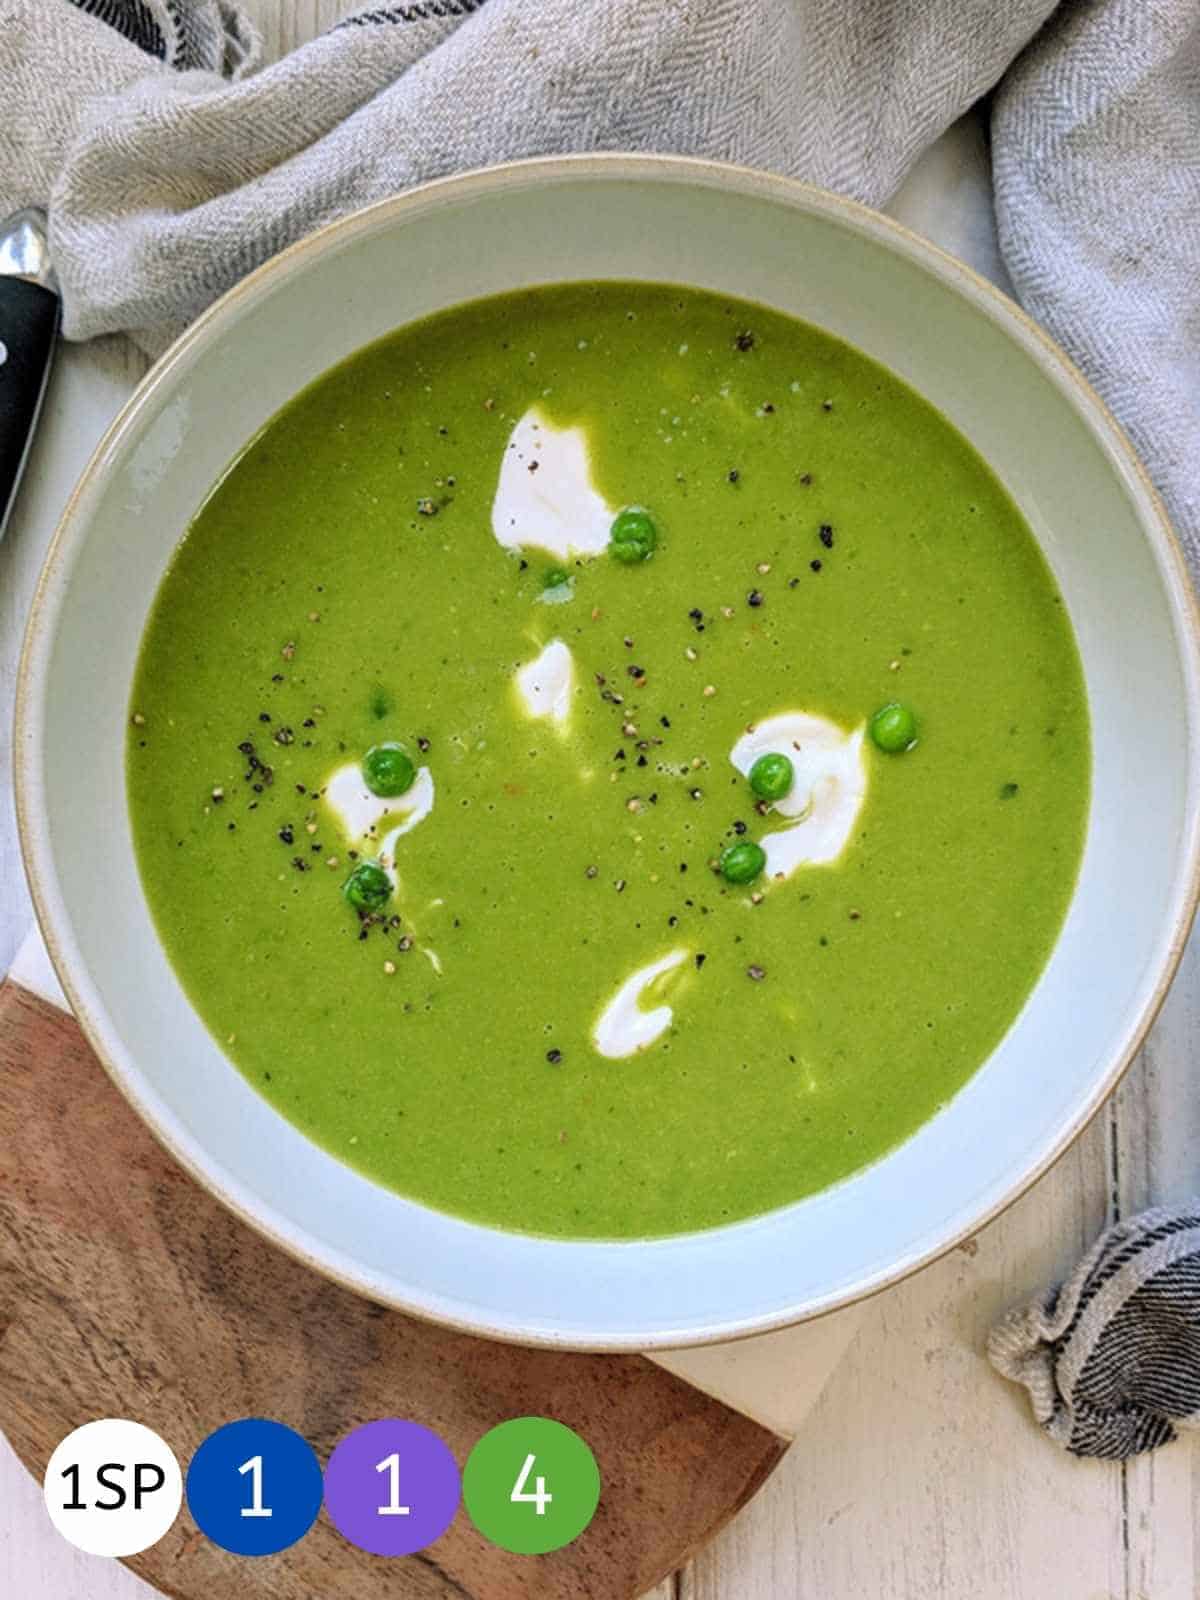 Green Pea Soup - The clever meal